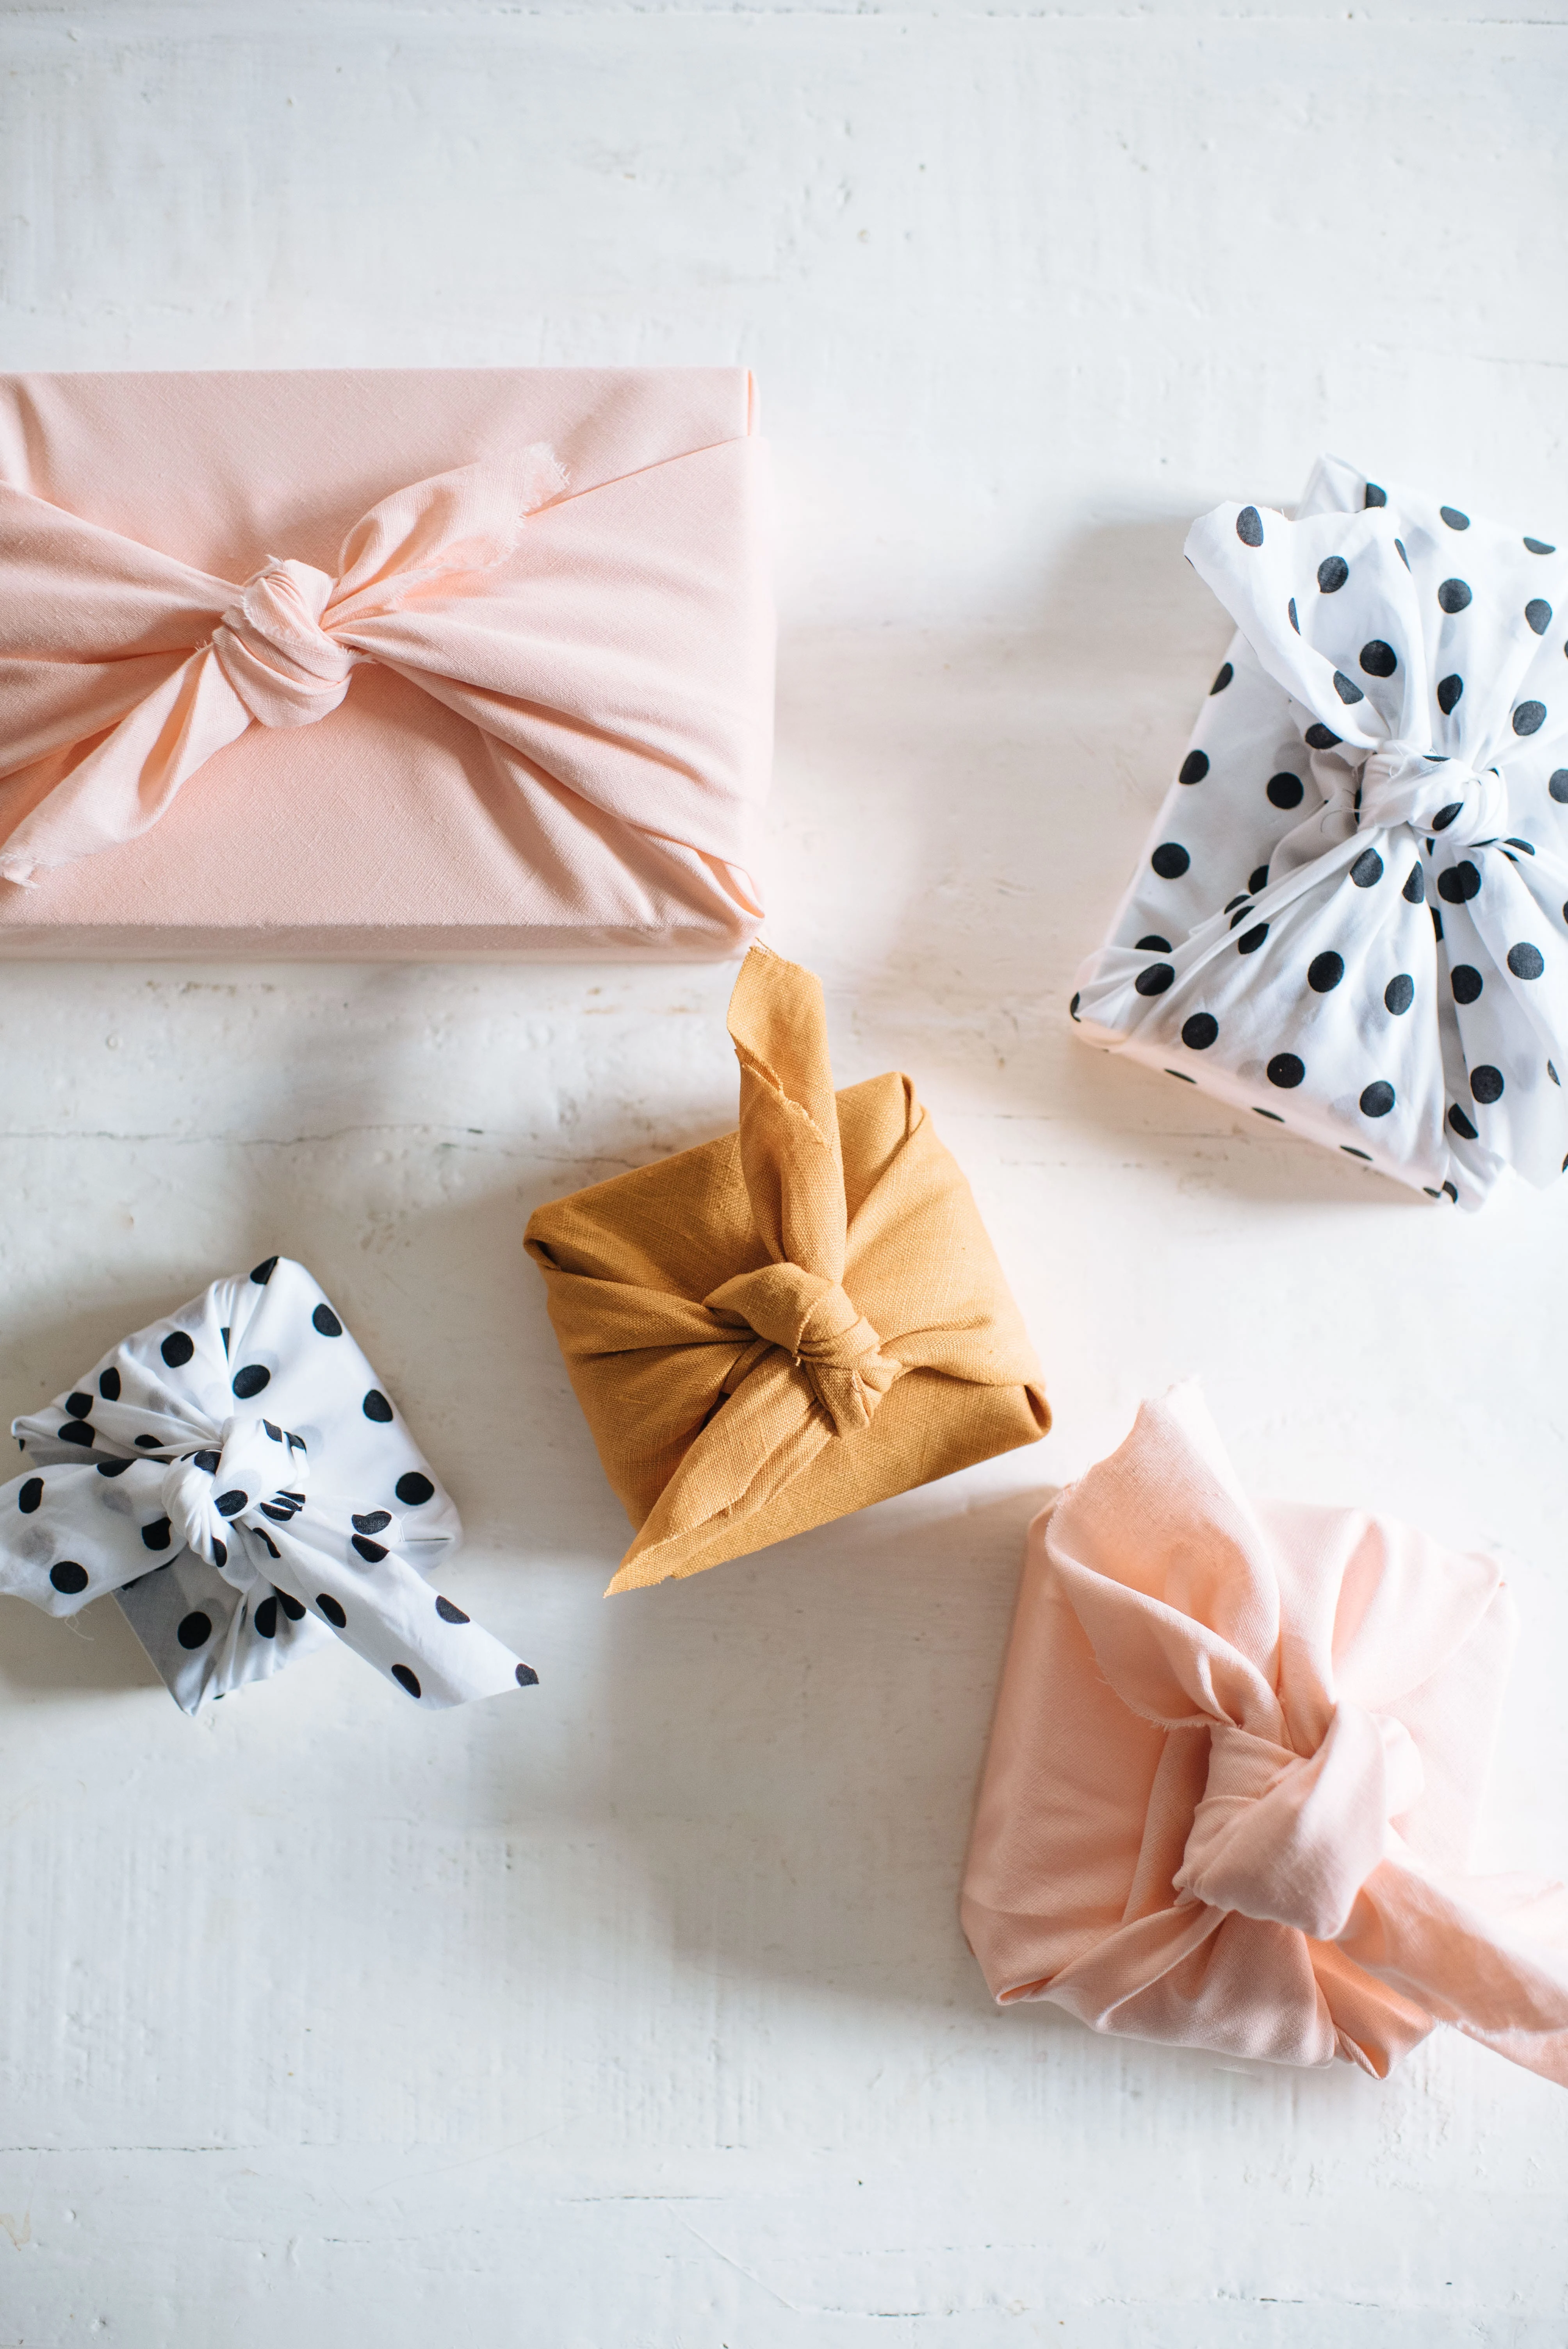 10 Cozy Christmas Gift Wrapping Ideas | Visit for Christmas party ideas, Christmas cocktails, Christmas recipes and more from entertaining blog @cydconverse